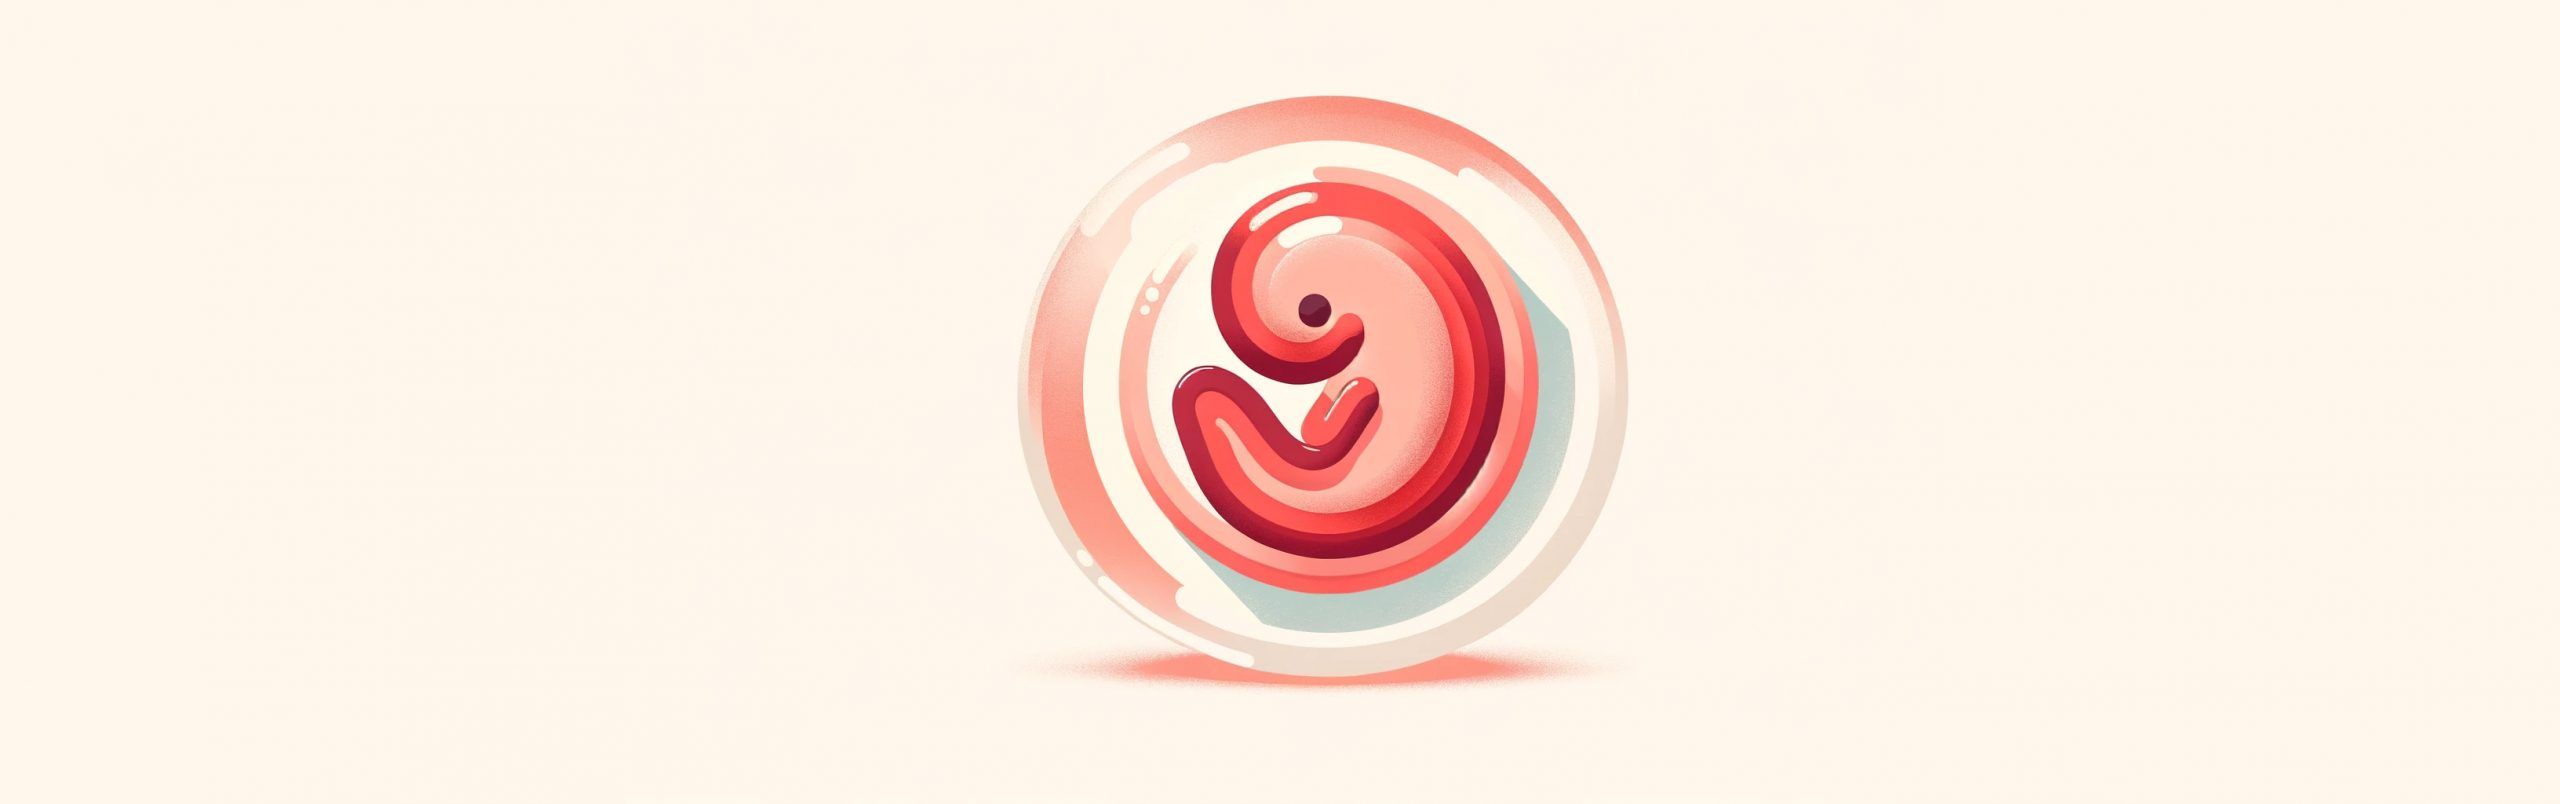 Graphic of Week 7 of pregnancy. An illustration of a baby at week 7 in the gestational sac.